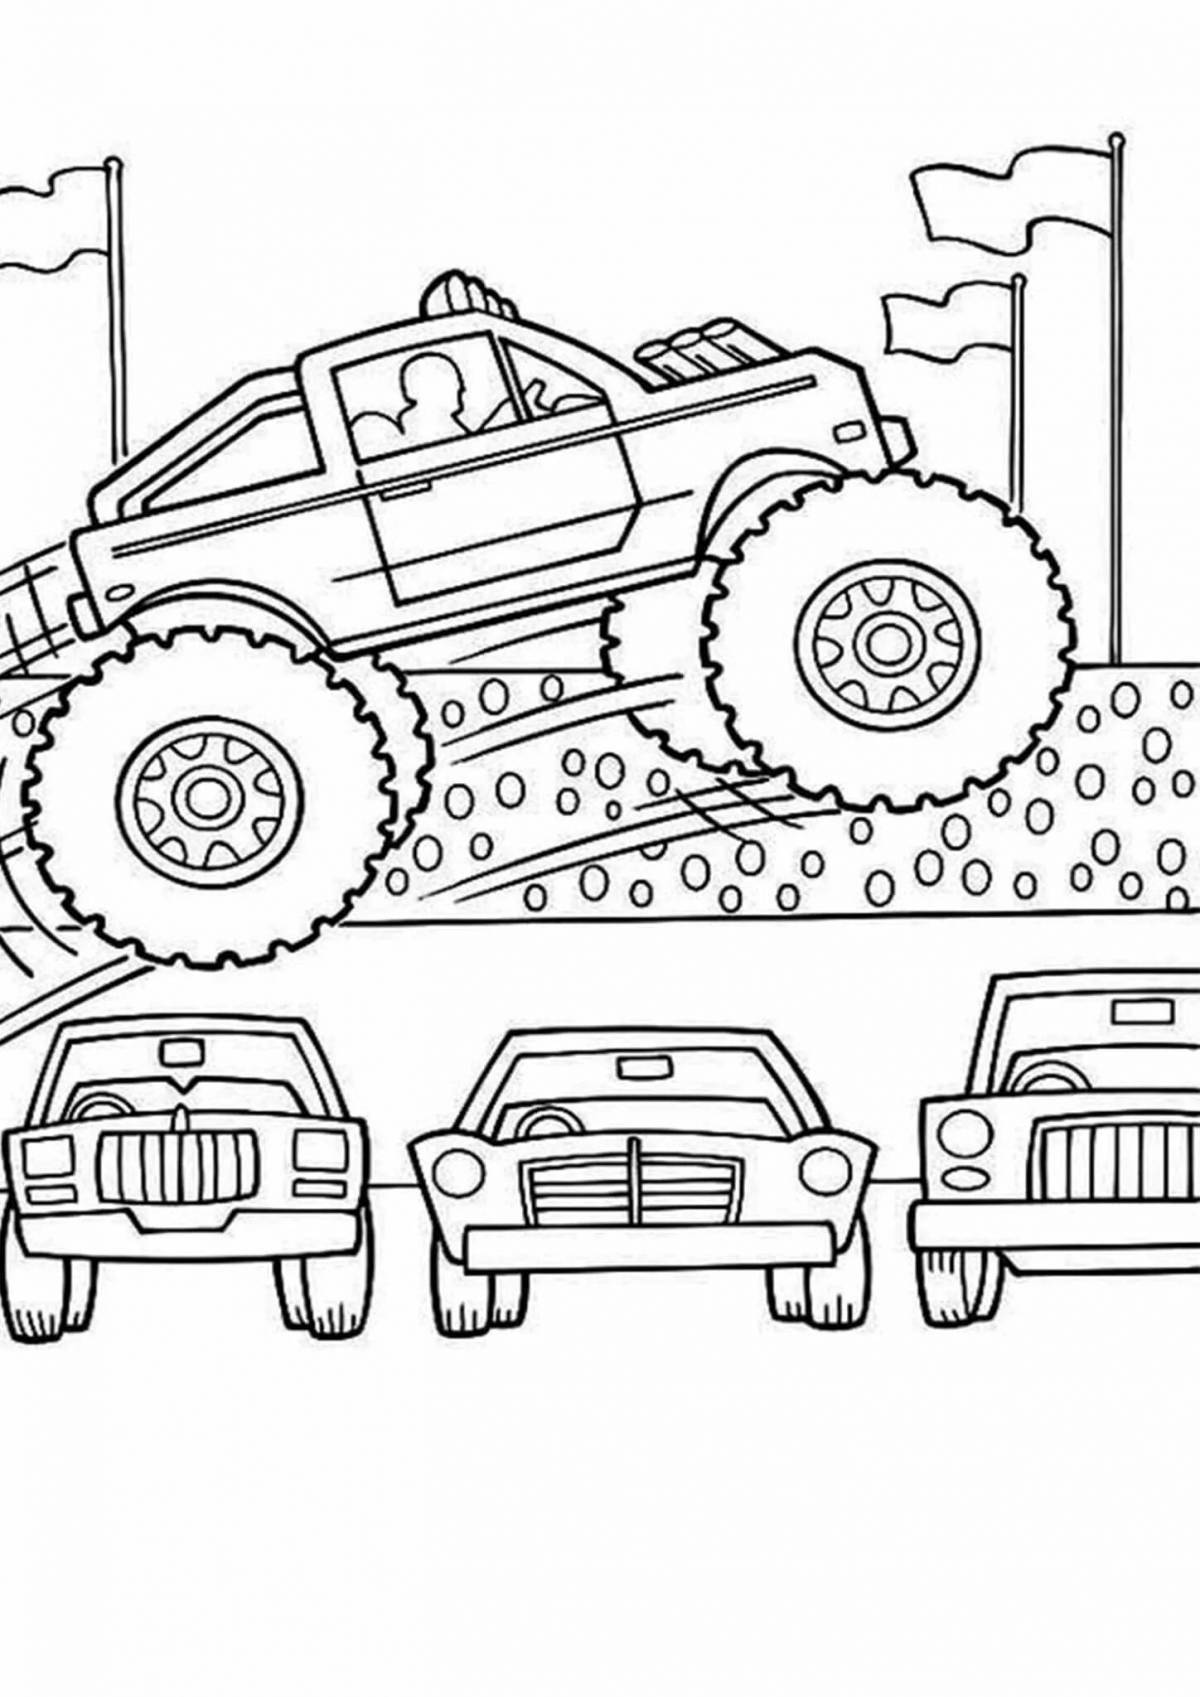 Colouring bright jeep for children 5-6 years old